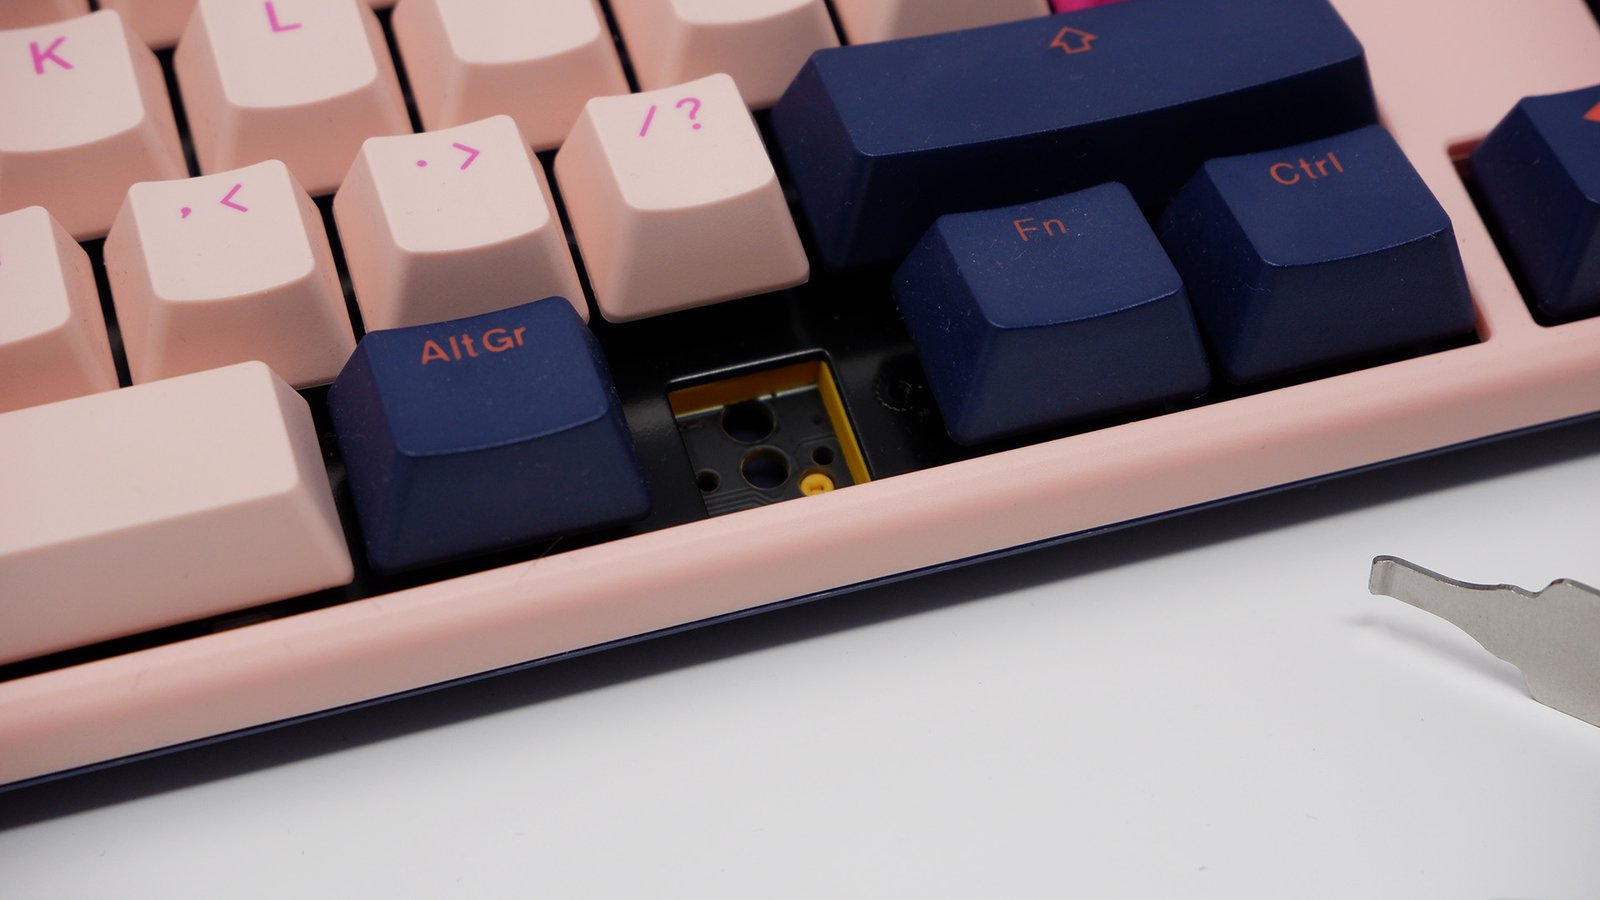 Ducky One 3 gaming keyboard in the Fuji colourway.